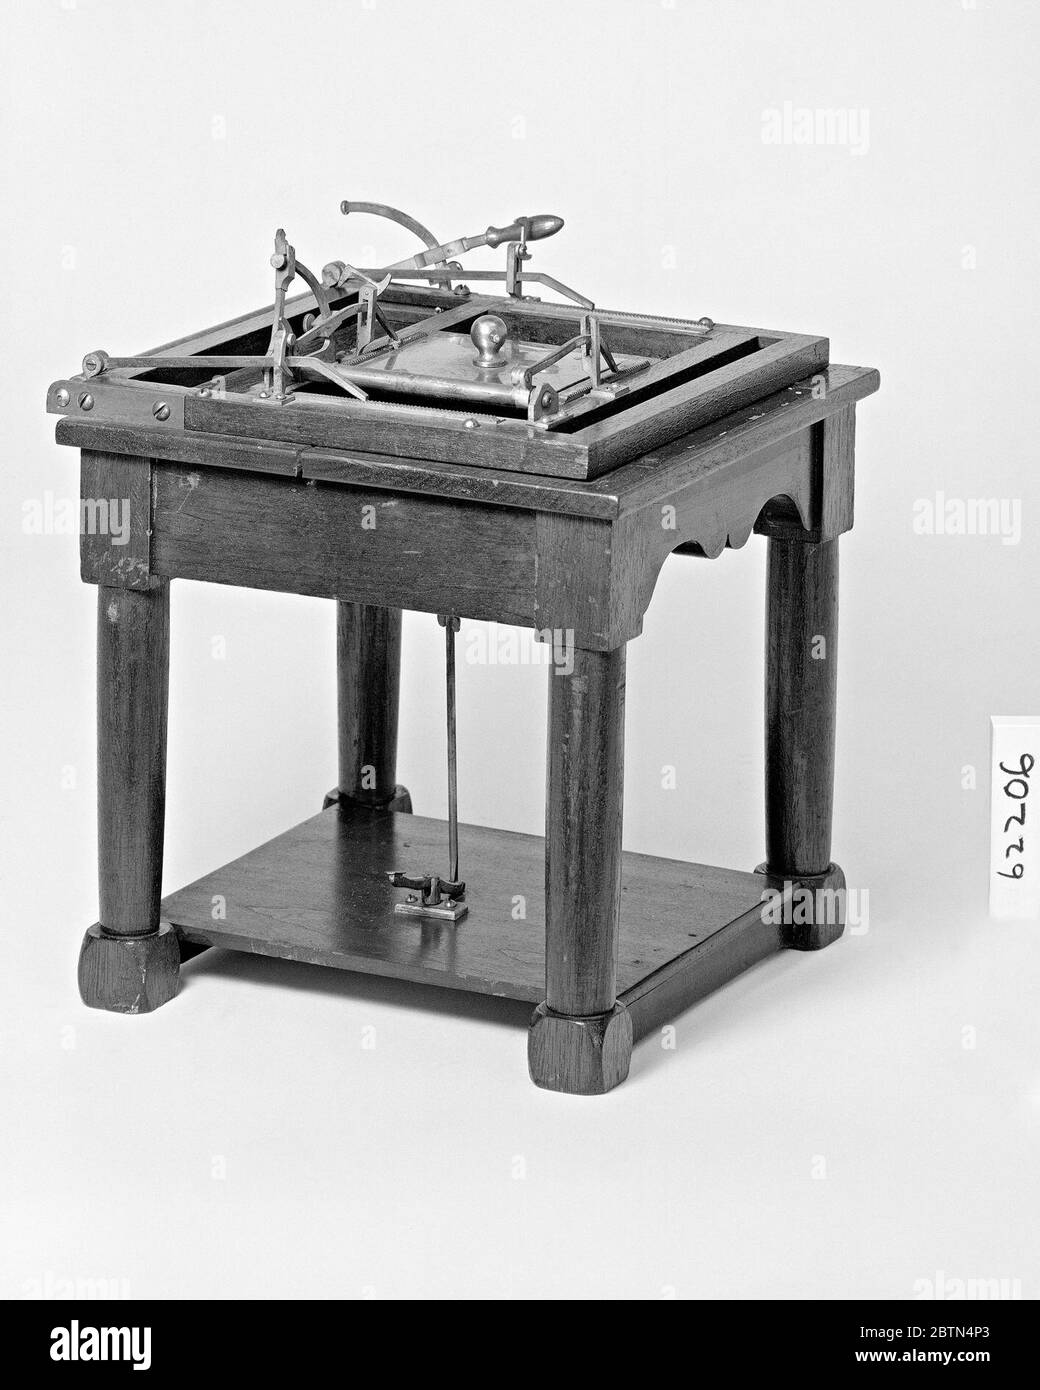 Patent Model of a Printing Apparatus for the Blind. This patent model demonstrates an invention for producing embossed letters on paper for communication between blind people; the invention was granted patent number 62206. Raised letters on plungers on a disk above the table were matched with sunken letter plungers below it. Stock Photo